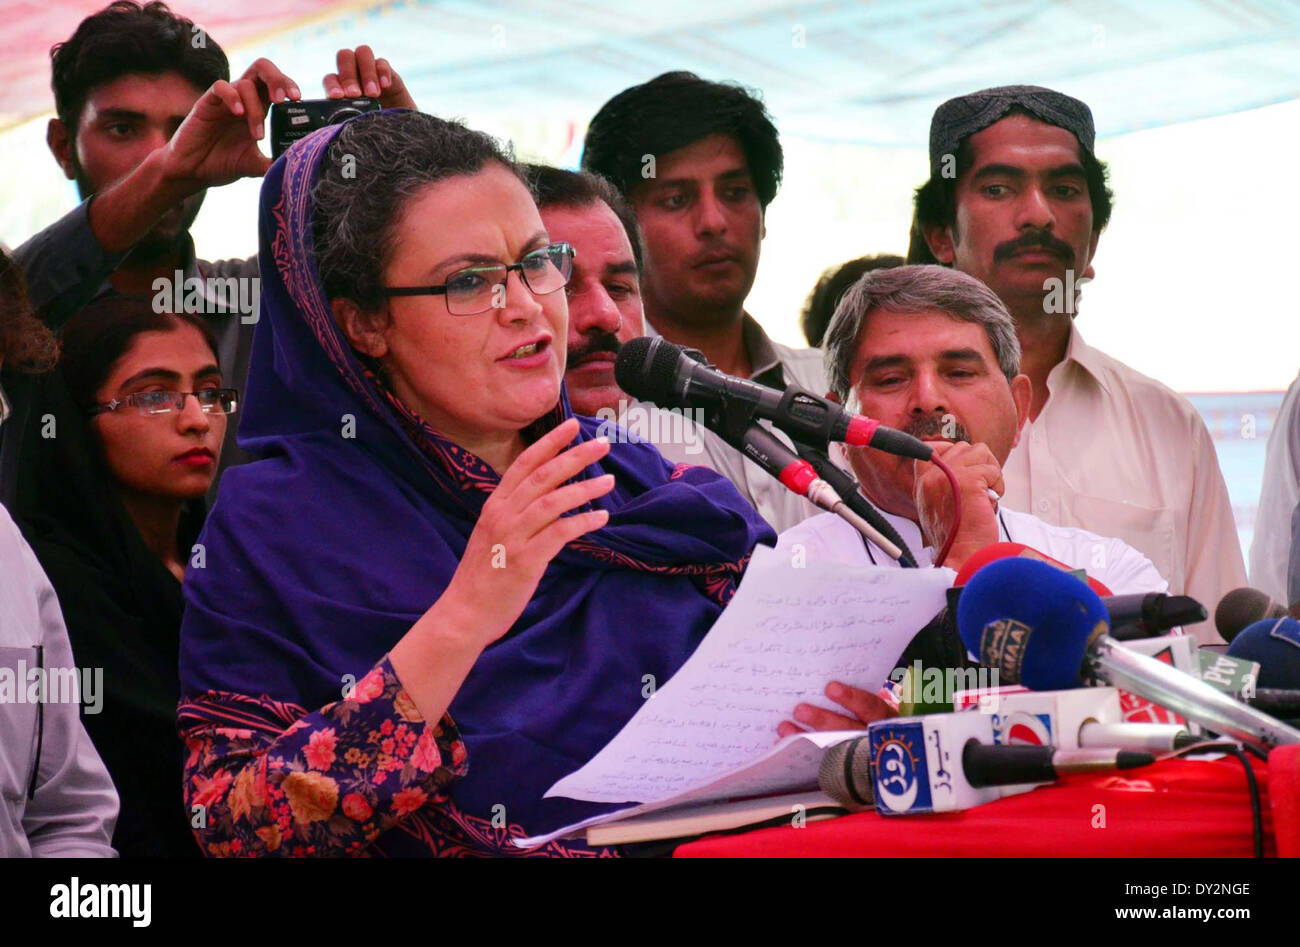 Chairperson Peoples Party (SB) Ghinwa Bhutto addresses to public gathering on the occasion of 35th death anniversary of Zulfiqar Ali Butto, held in Garhi Khuda Bux on Friday, April 04, 2014. The 35th death anniversary of Pakistan People Party (PPP) founder late, Zulfiqar Ali Bhutto is being observed by devotees of Z.A Bhutto huge gathering to be held at Garhi Khuda Bux town in Larkana, with a pledge to continue Bhutto’s mission and strengthen the democratic norms in the country. Credit:  Asianet-Pakistan/Alamy Live News Stock Photo